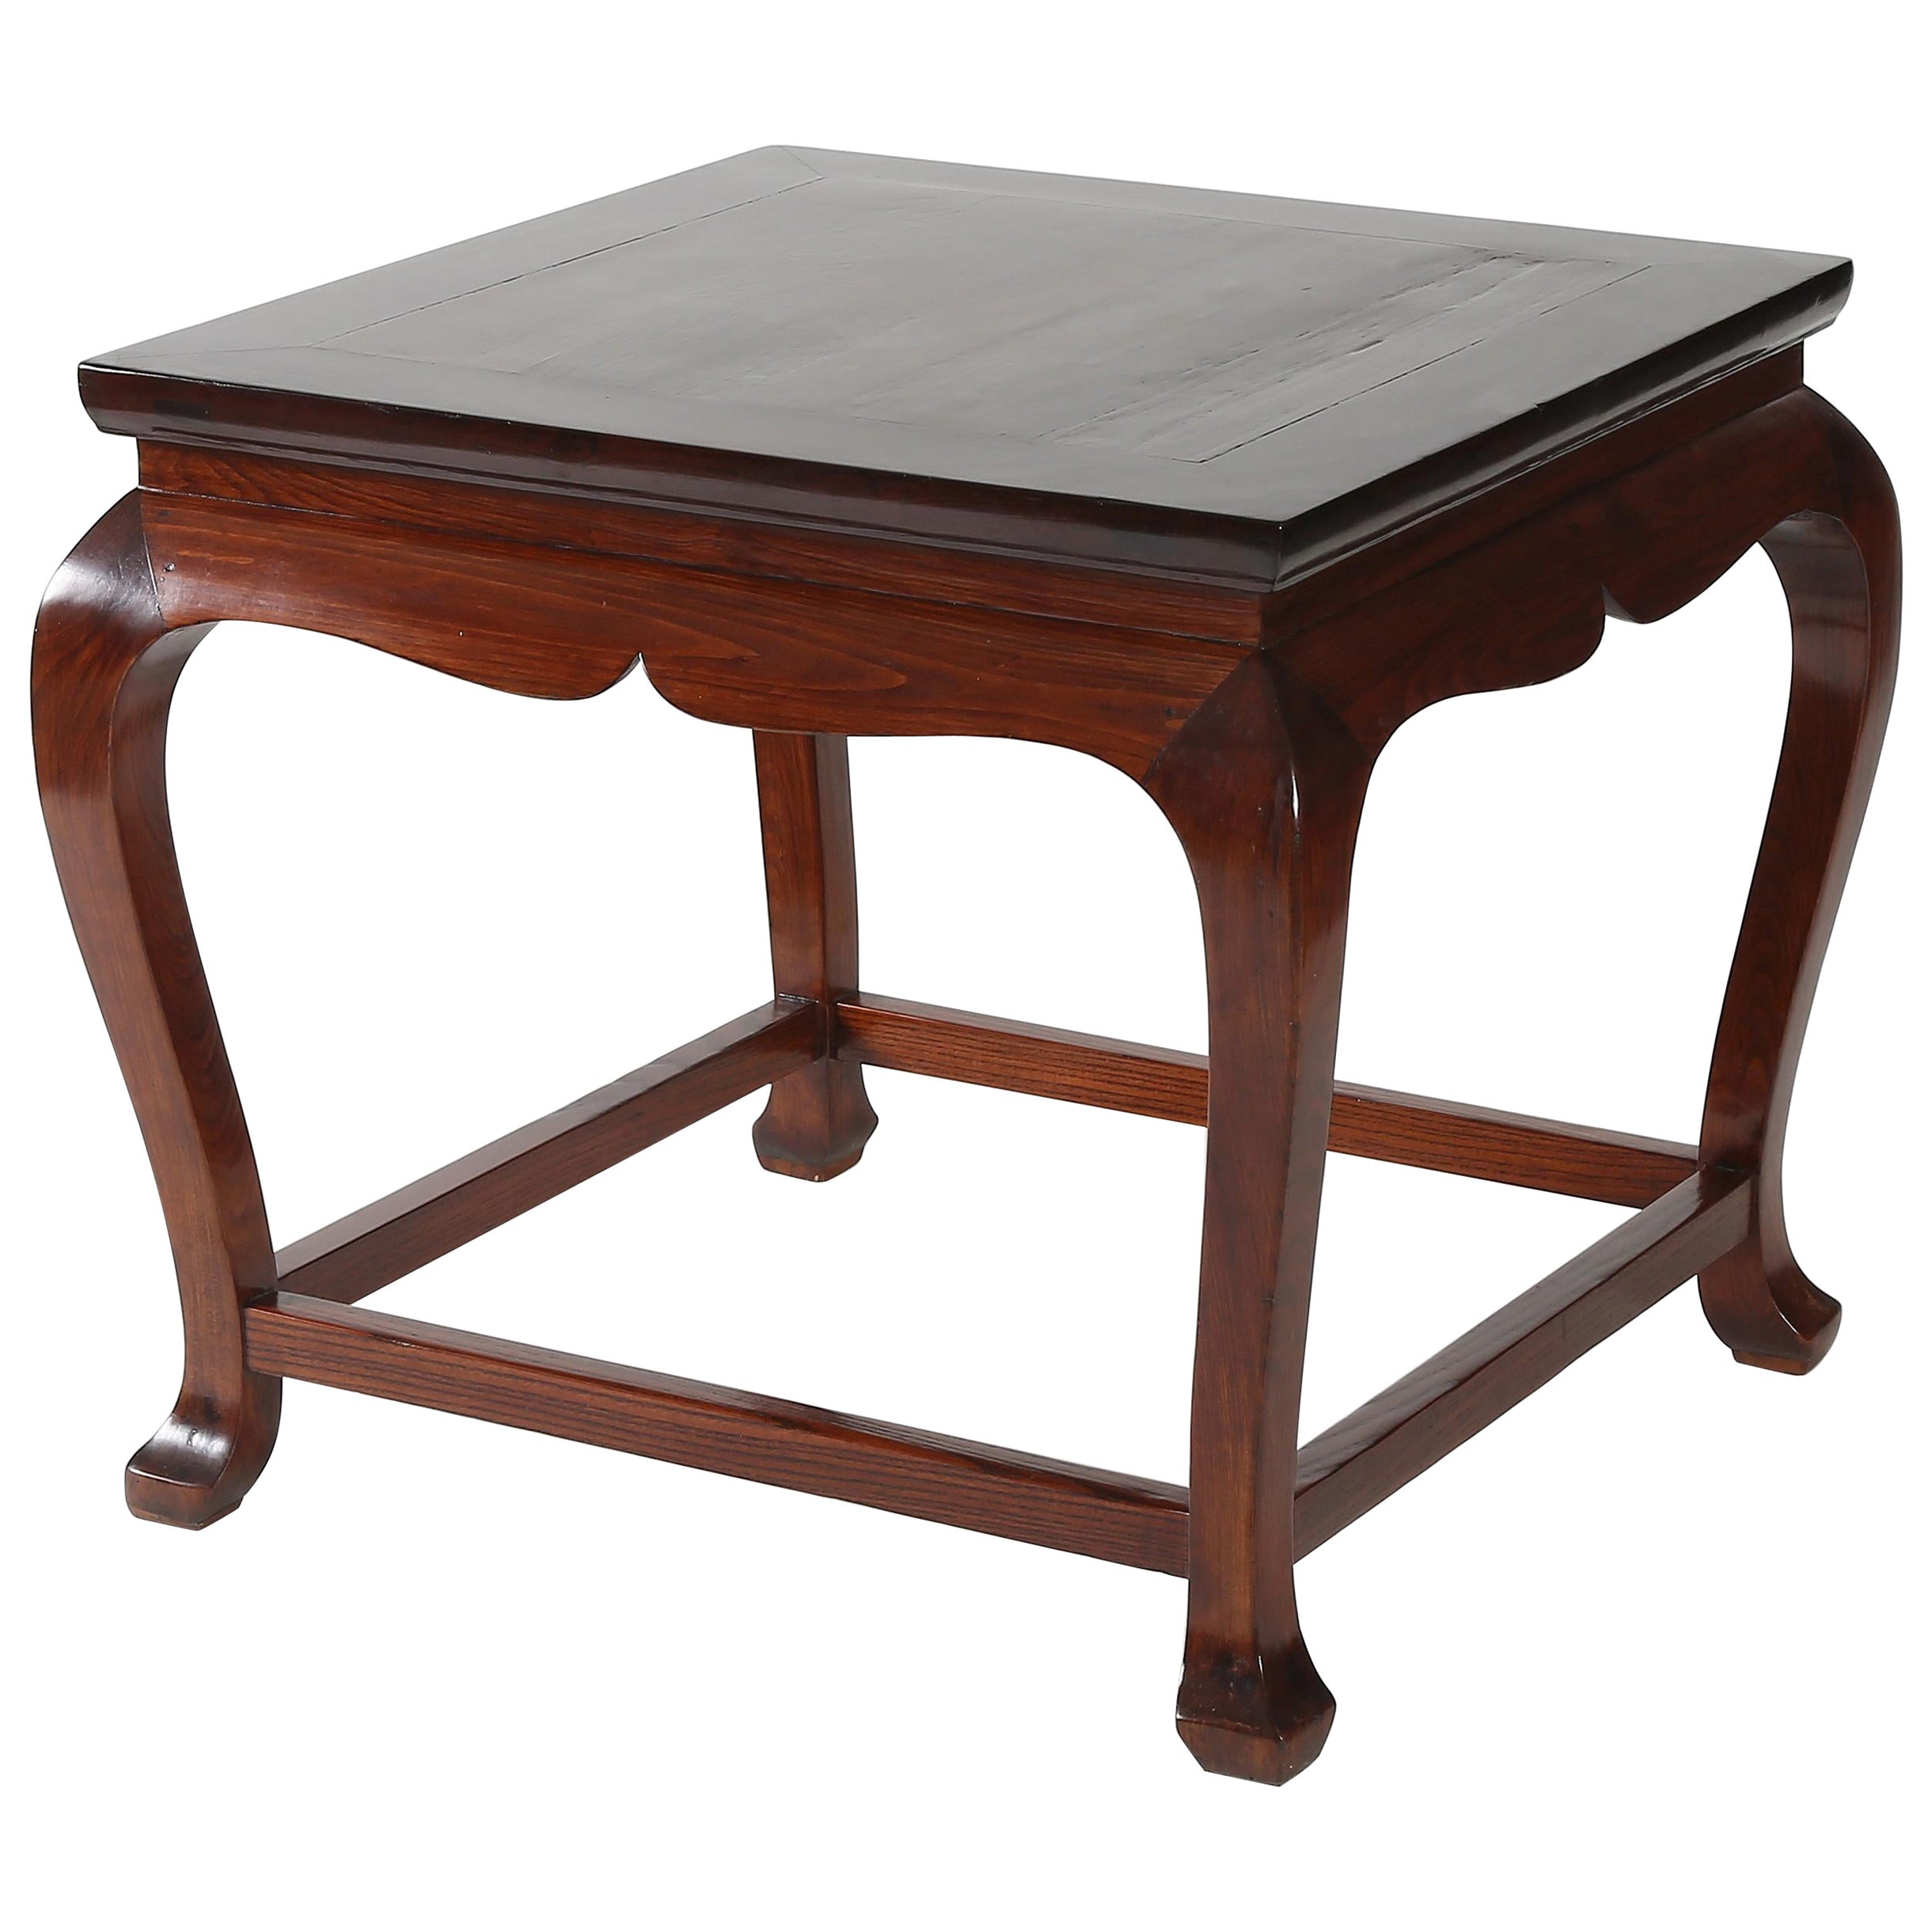 19th Century Square Table with Cabriole Legs For Sale